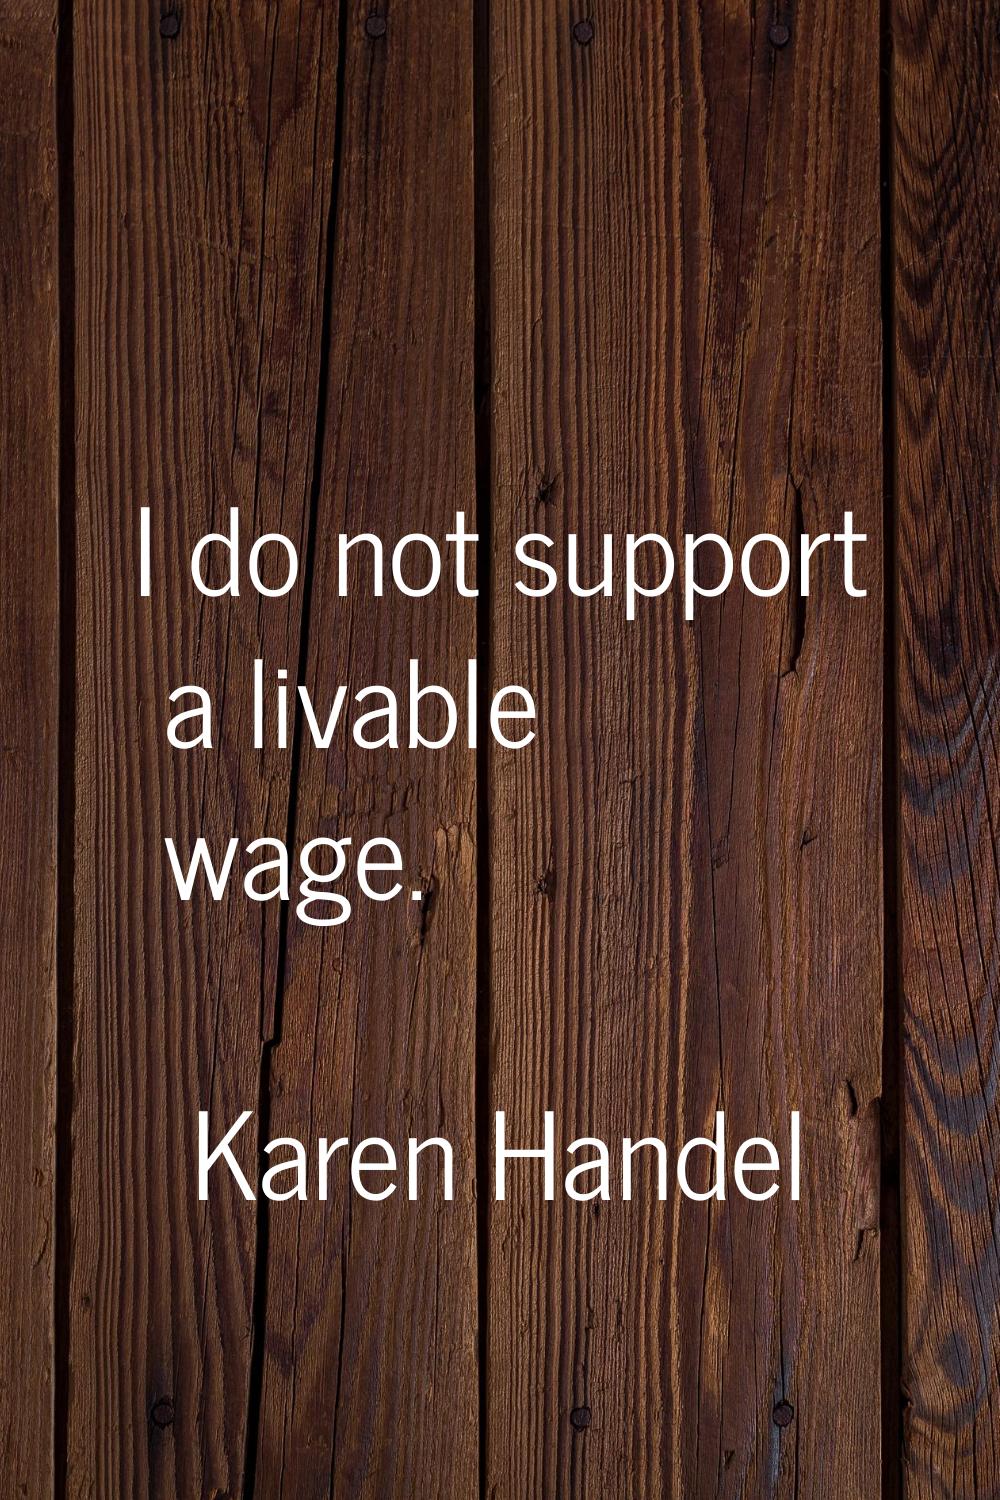 I do not support a livable wage.